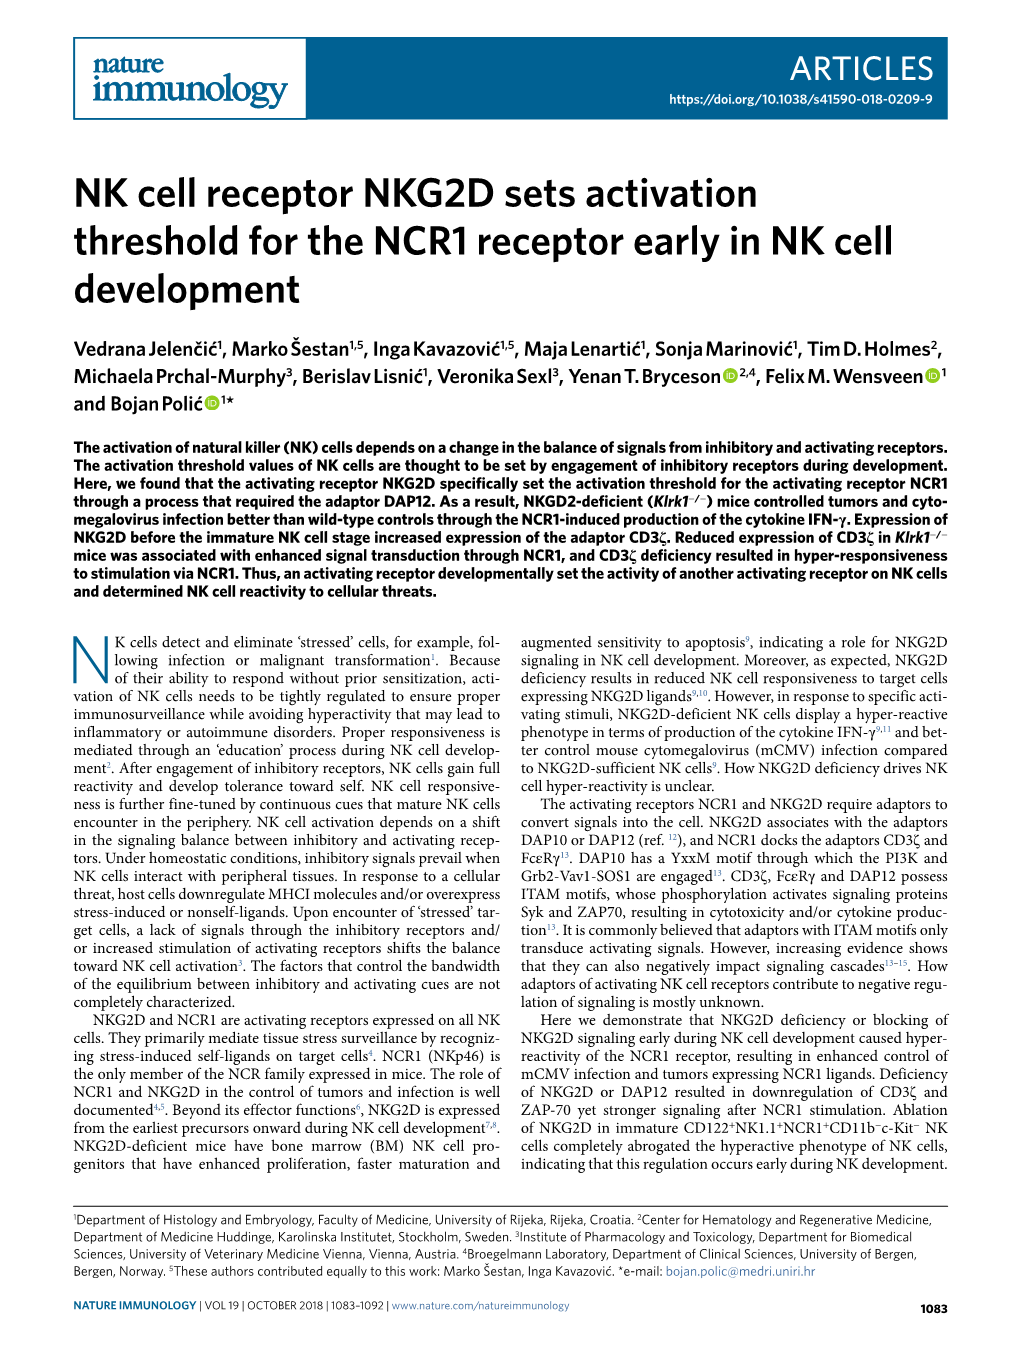 NK Cell Receptor NKG2D Sets Activation Threshold for the NCR1 Receptor Early in NK Cell Development